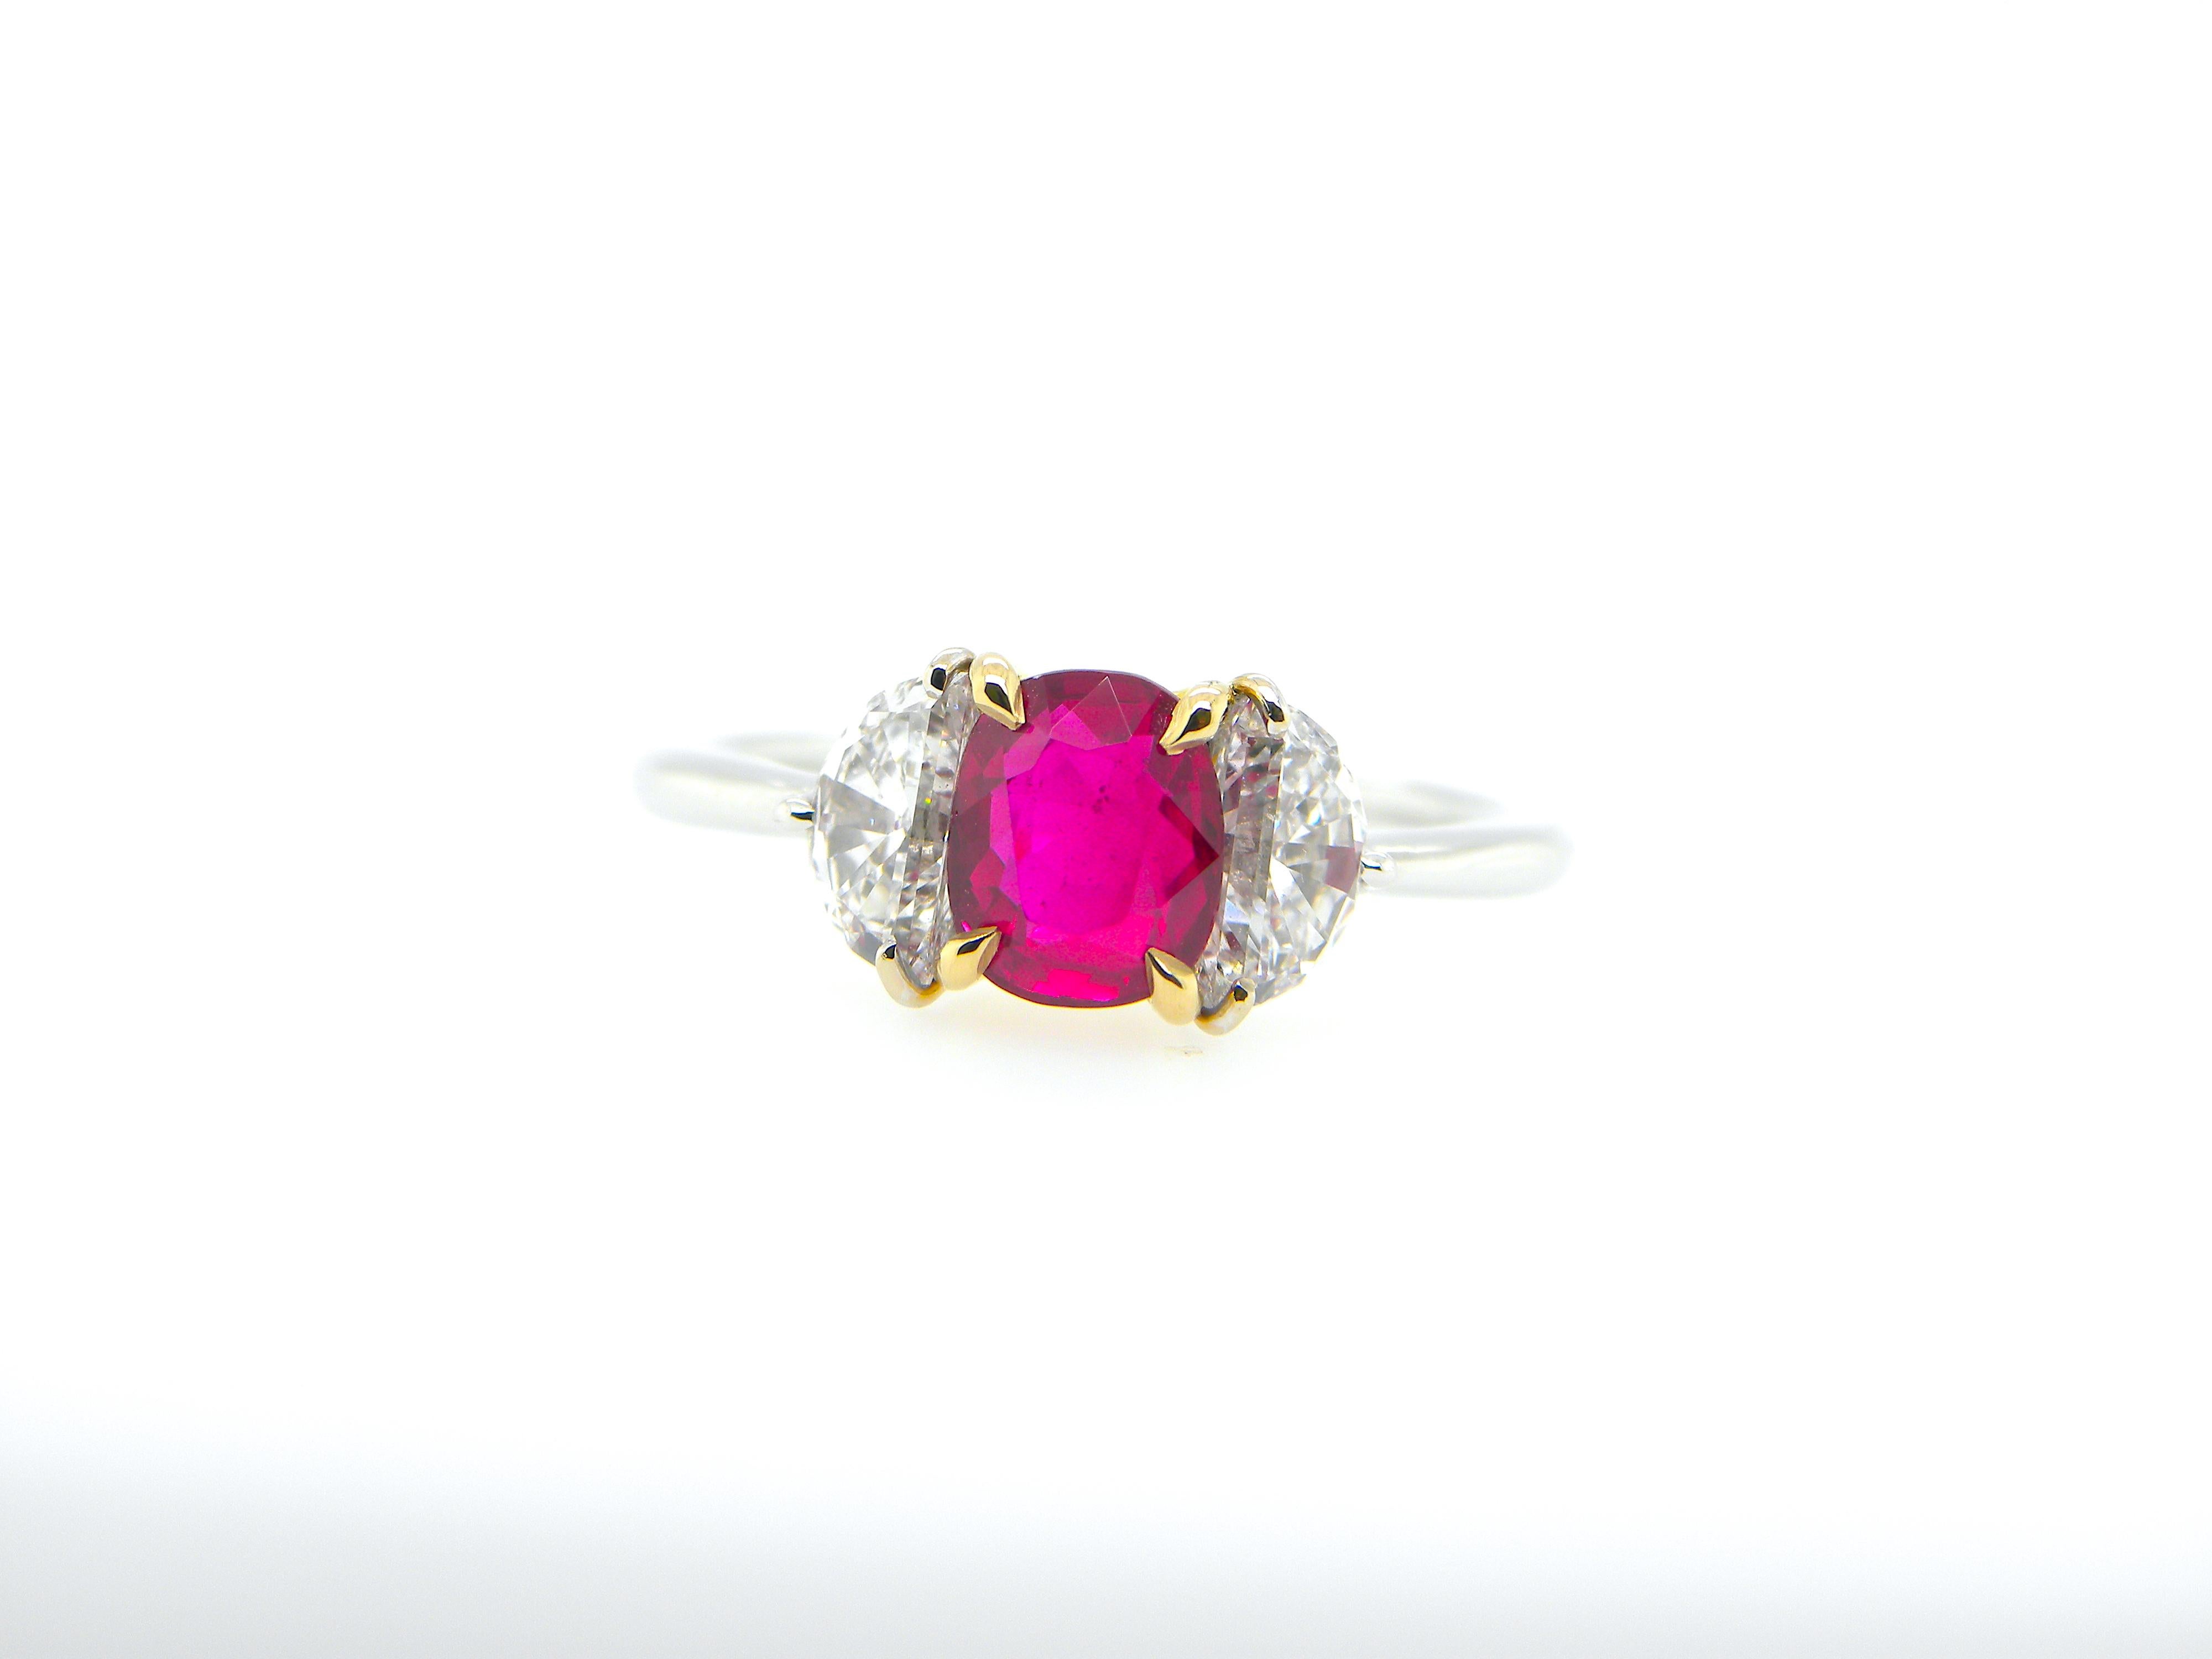 1.18 Carat GIA Certified Burma No Heat Pigeon's Blood Red Ruby and Diamond Ring:

A stunning three-stone ring, it features a very rare GIA certified unheated Burmese pigeon's blood red ruby weighing 1.18 carat flanked by super-white half-moon cut